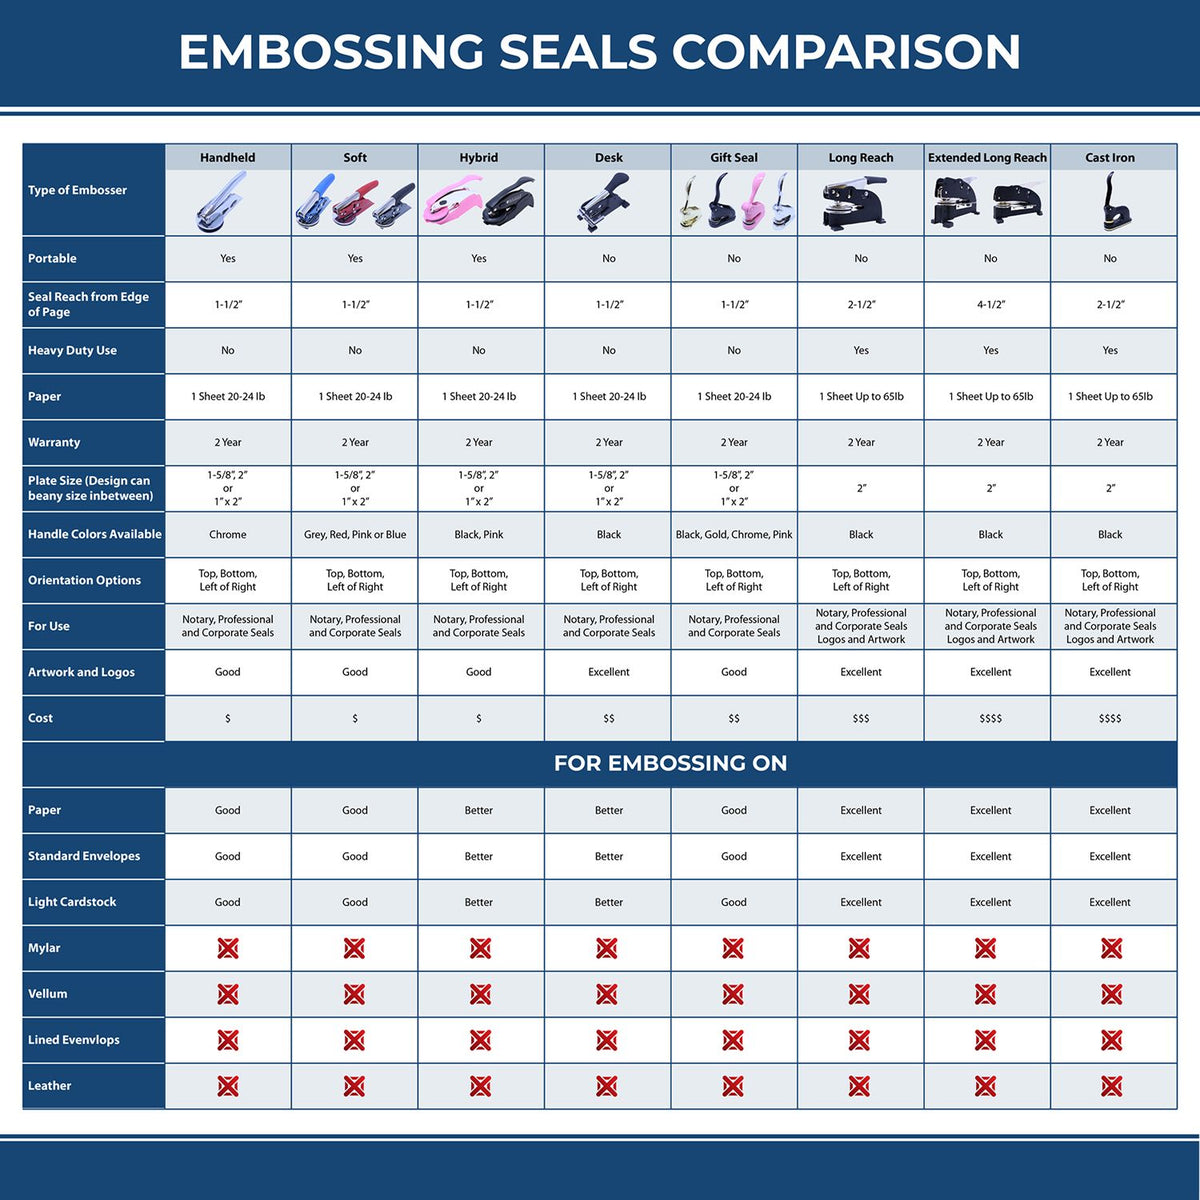 A comparison chart for the different types of mount models available for the Connecticut Desk Architect Embossing Seal.